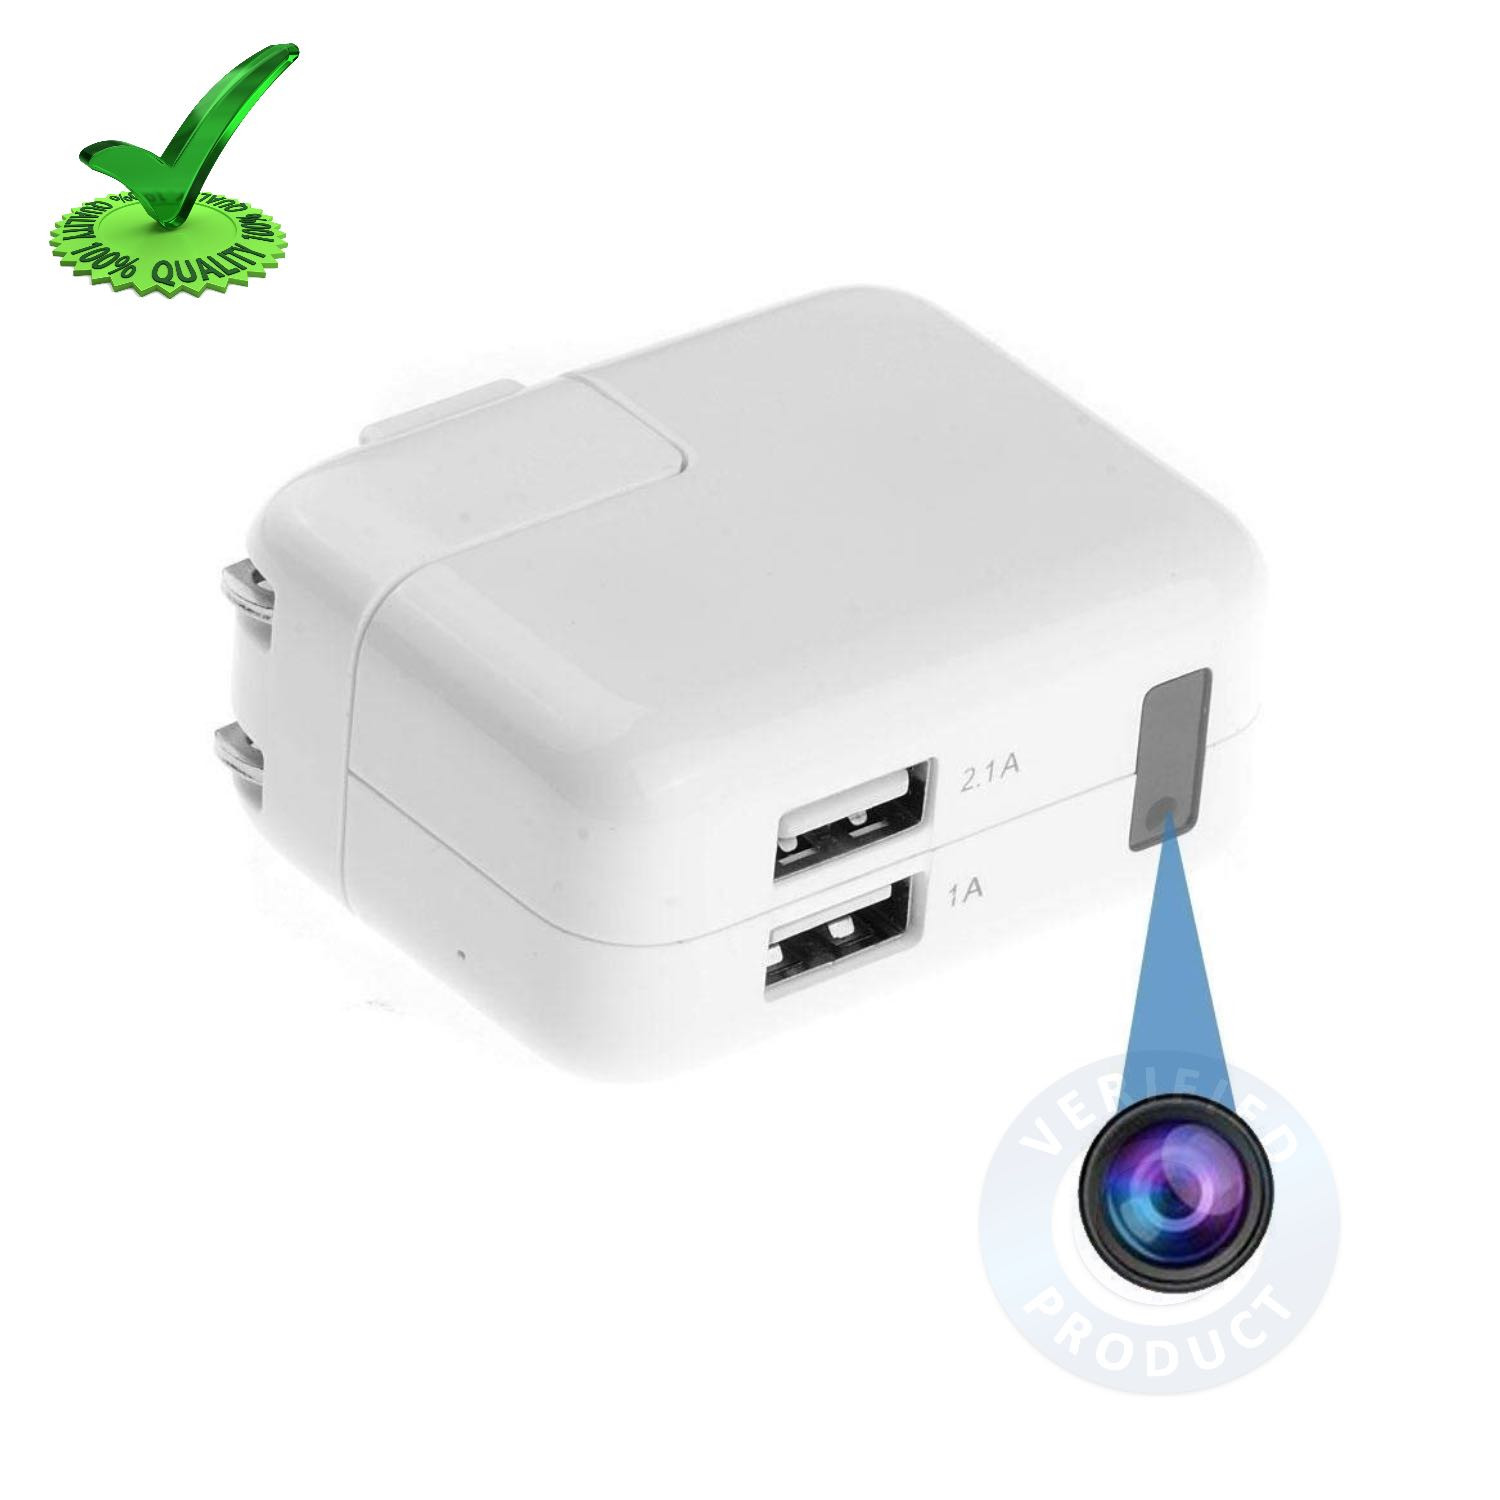 Digital 4k Wi-Fi Spy Hidden Camera with Recorder in Apple Usb Charger